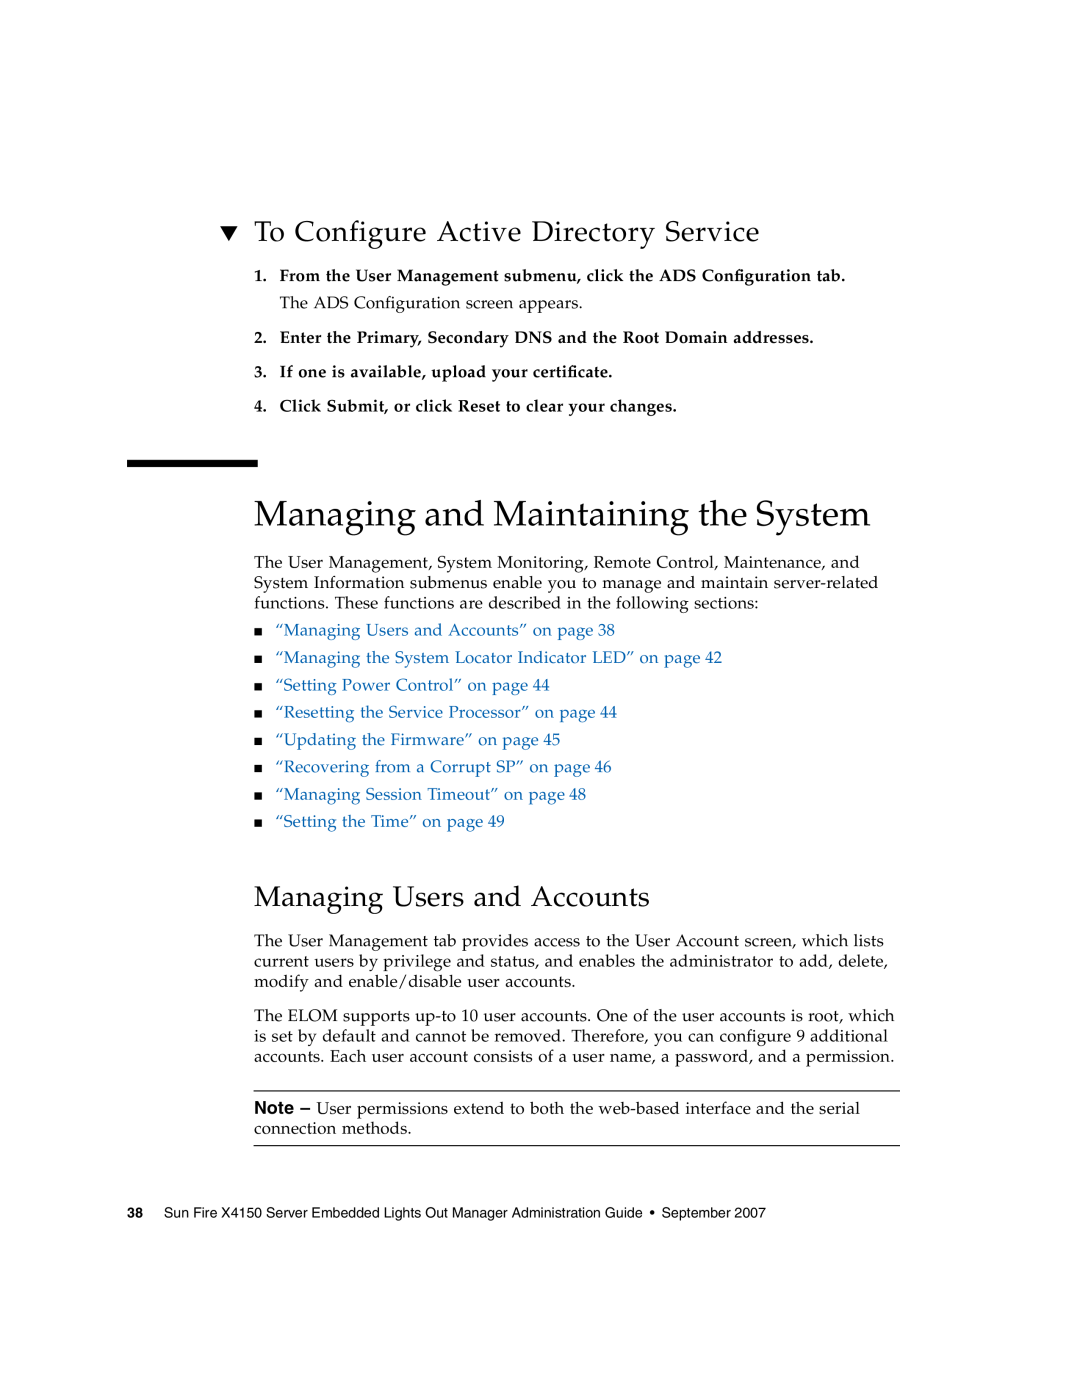 Sun Microsystems X4150 manual Managing and Maintaining the System, To Configure Active Directory Service 